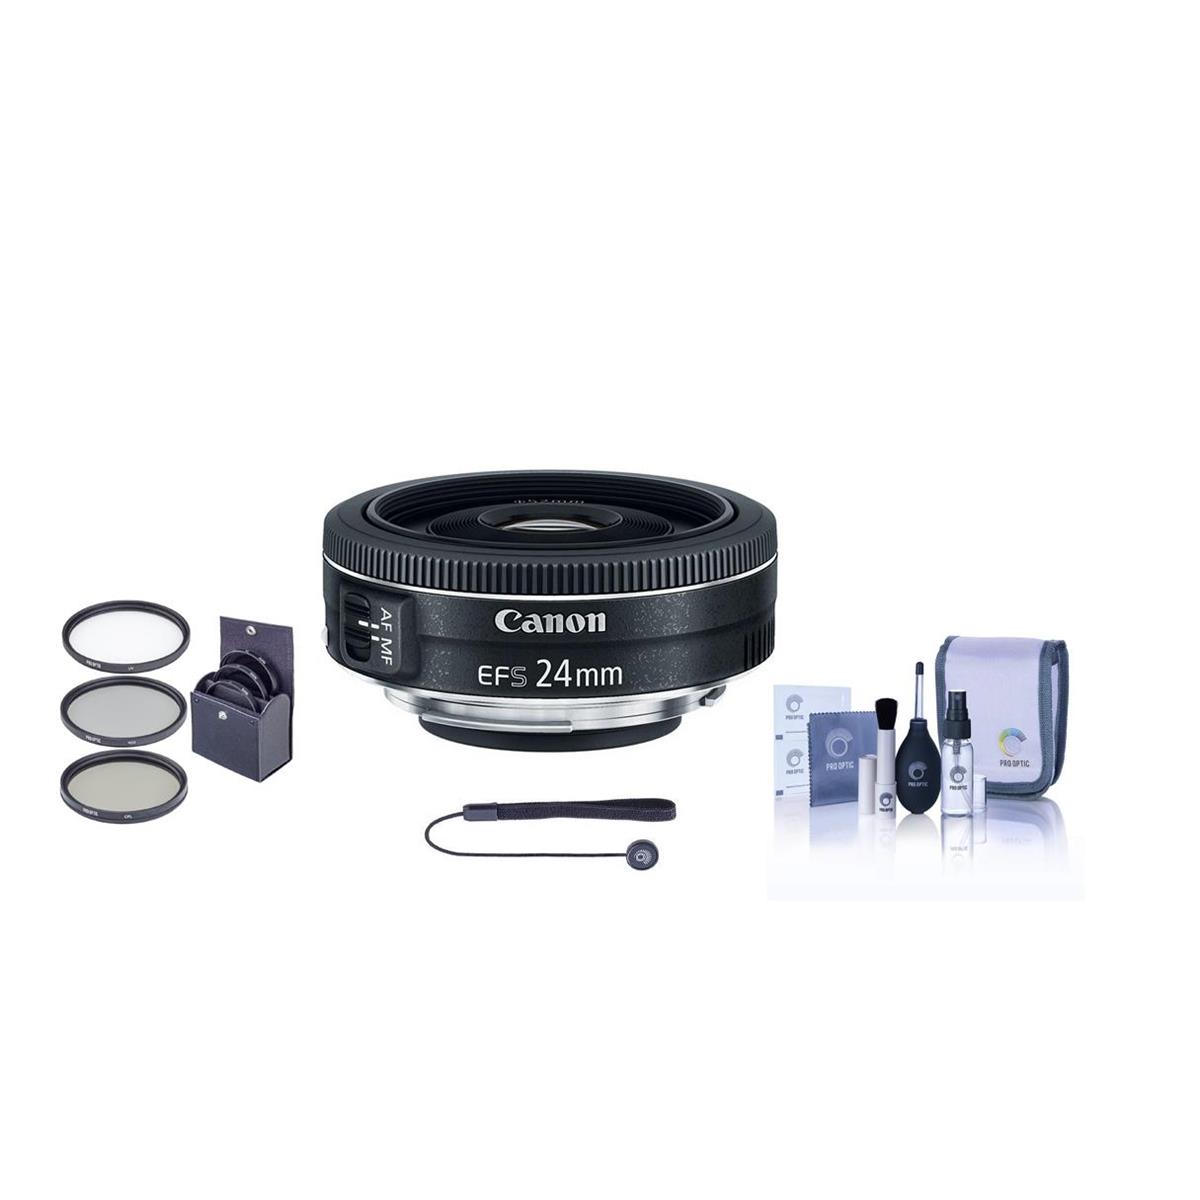 Image of Canon EF-S 24mm f/2.8 STM Lens with Accessories Kit